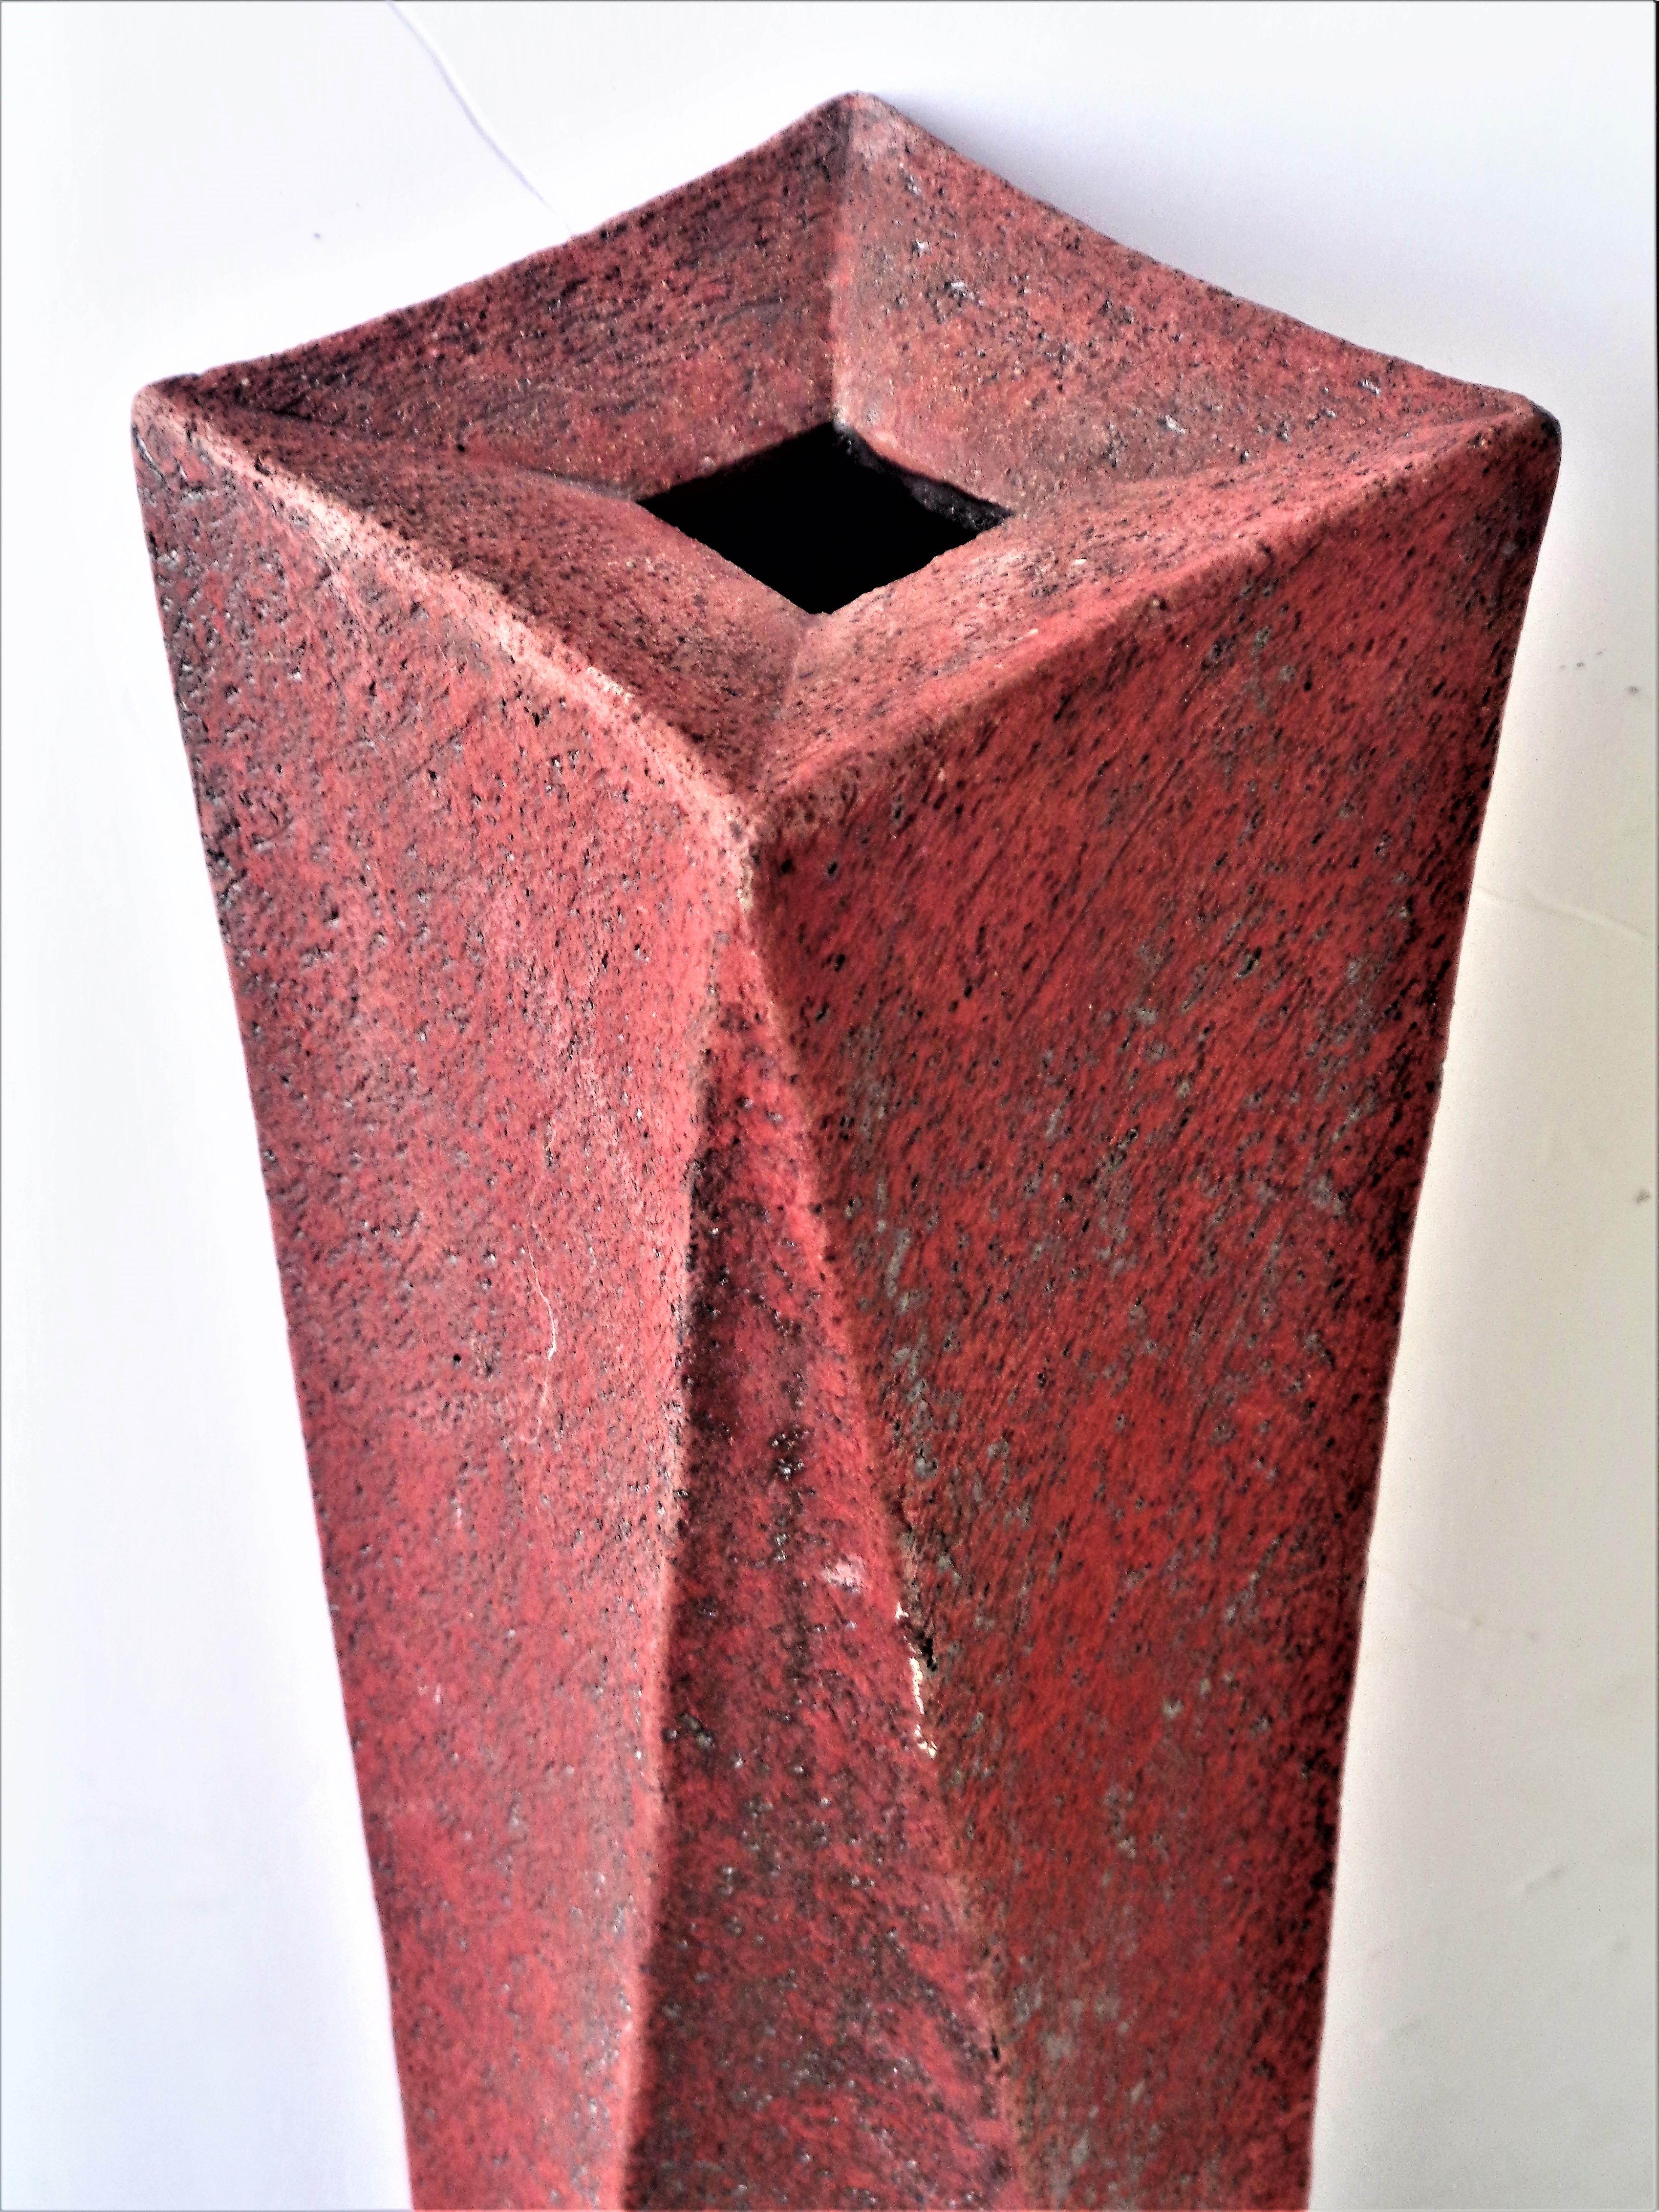 Carved Contemporary American Studio Architectural Ceramic Vessel by Ryan Florey